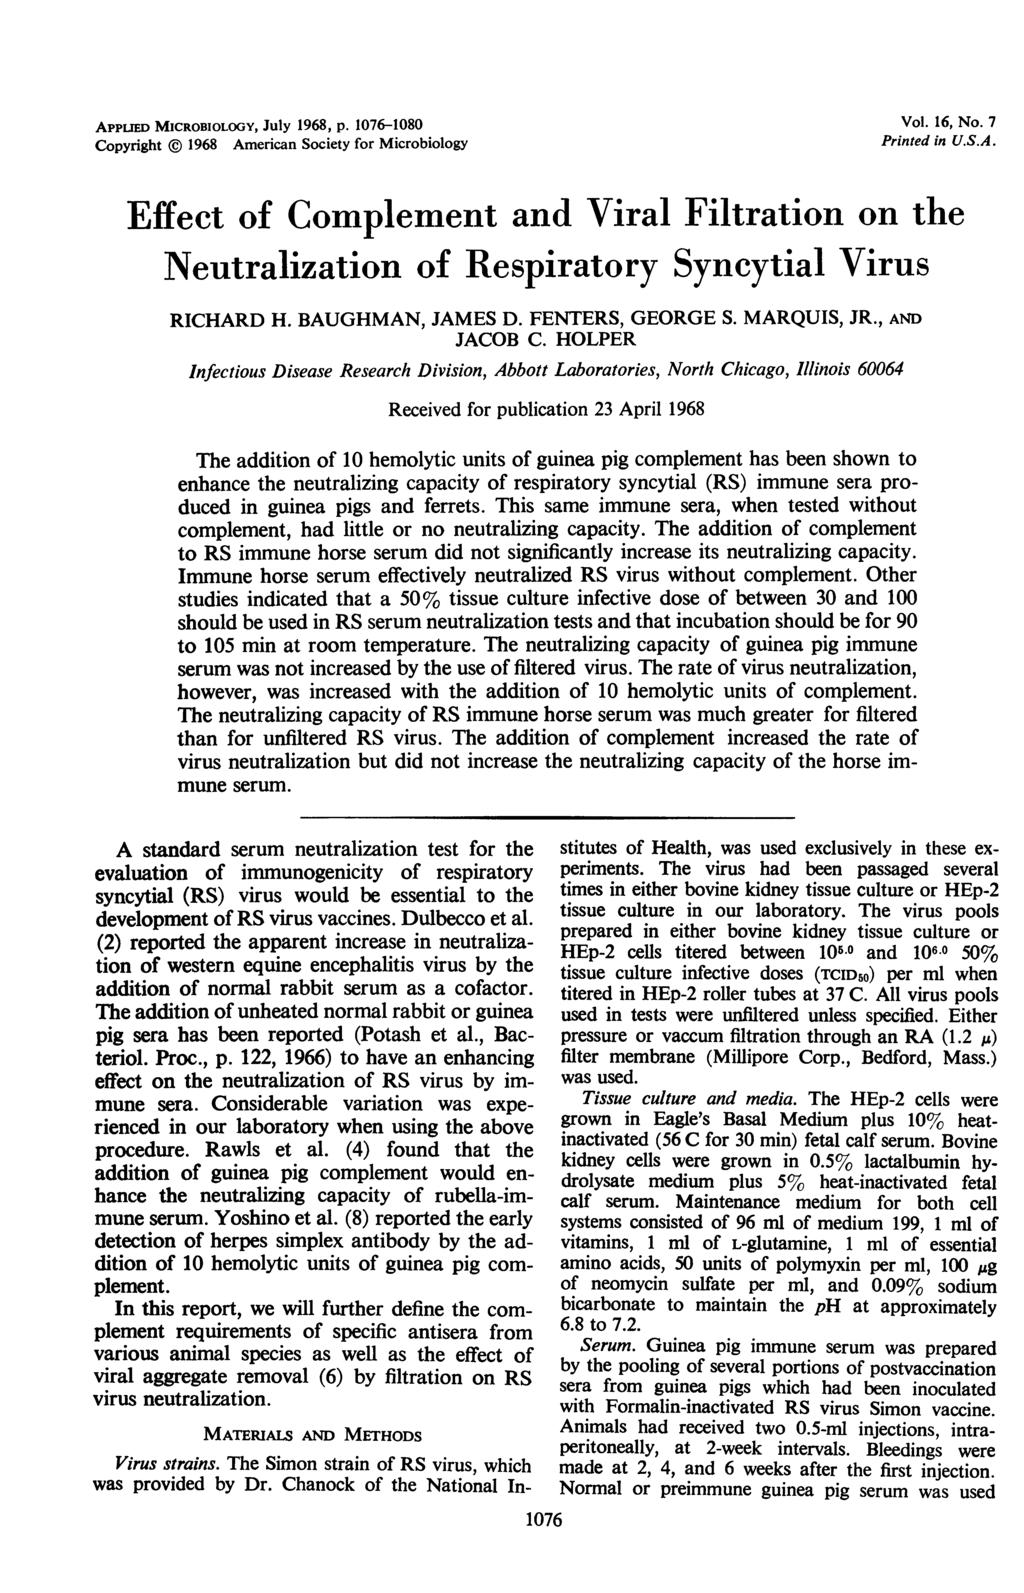 APPLIED MICROBIOLOGY, JUlY 1968, p. 1076-1080 Copyright @ 1968 American Society for Microbiology Vol. 16, No. 7 Printed in U.S.A. Effect of Complement and Viral Filtration on the Neutralization of Respiratory Syncytial Virus RICHARD H.